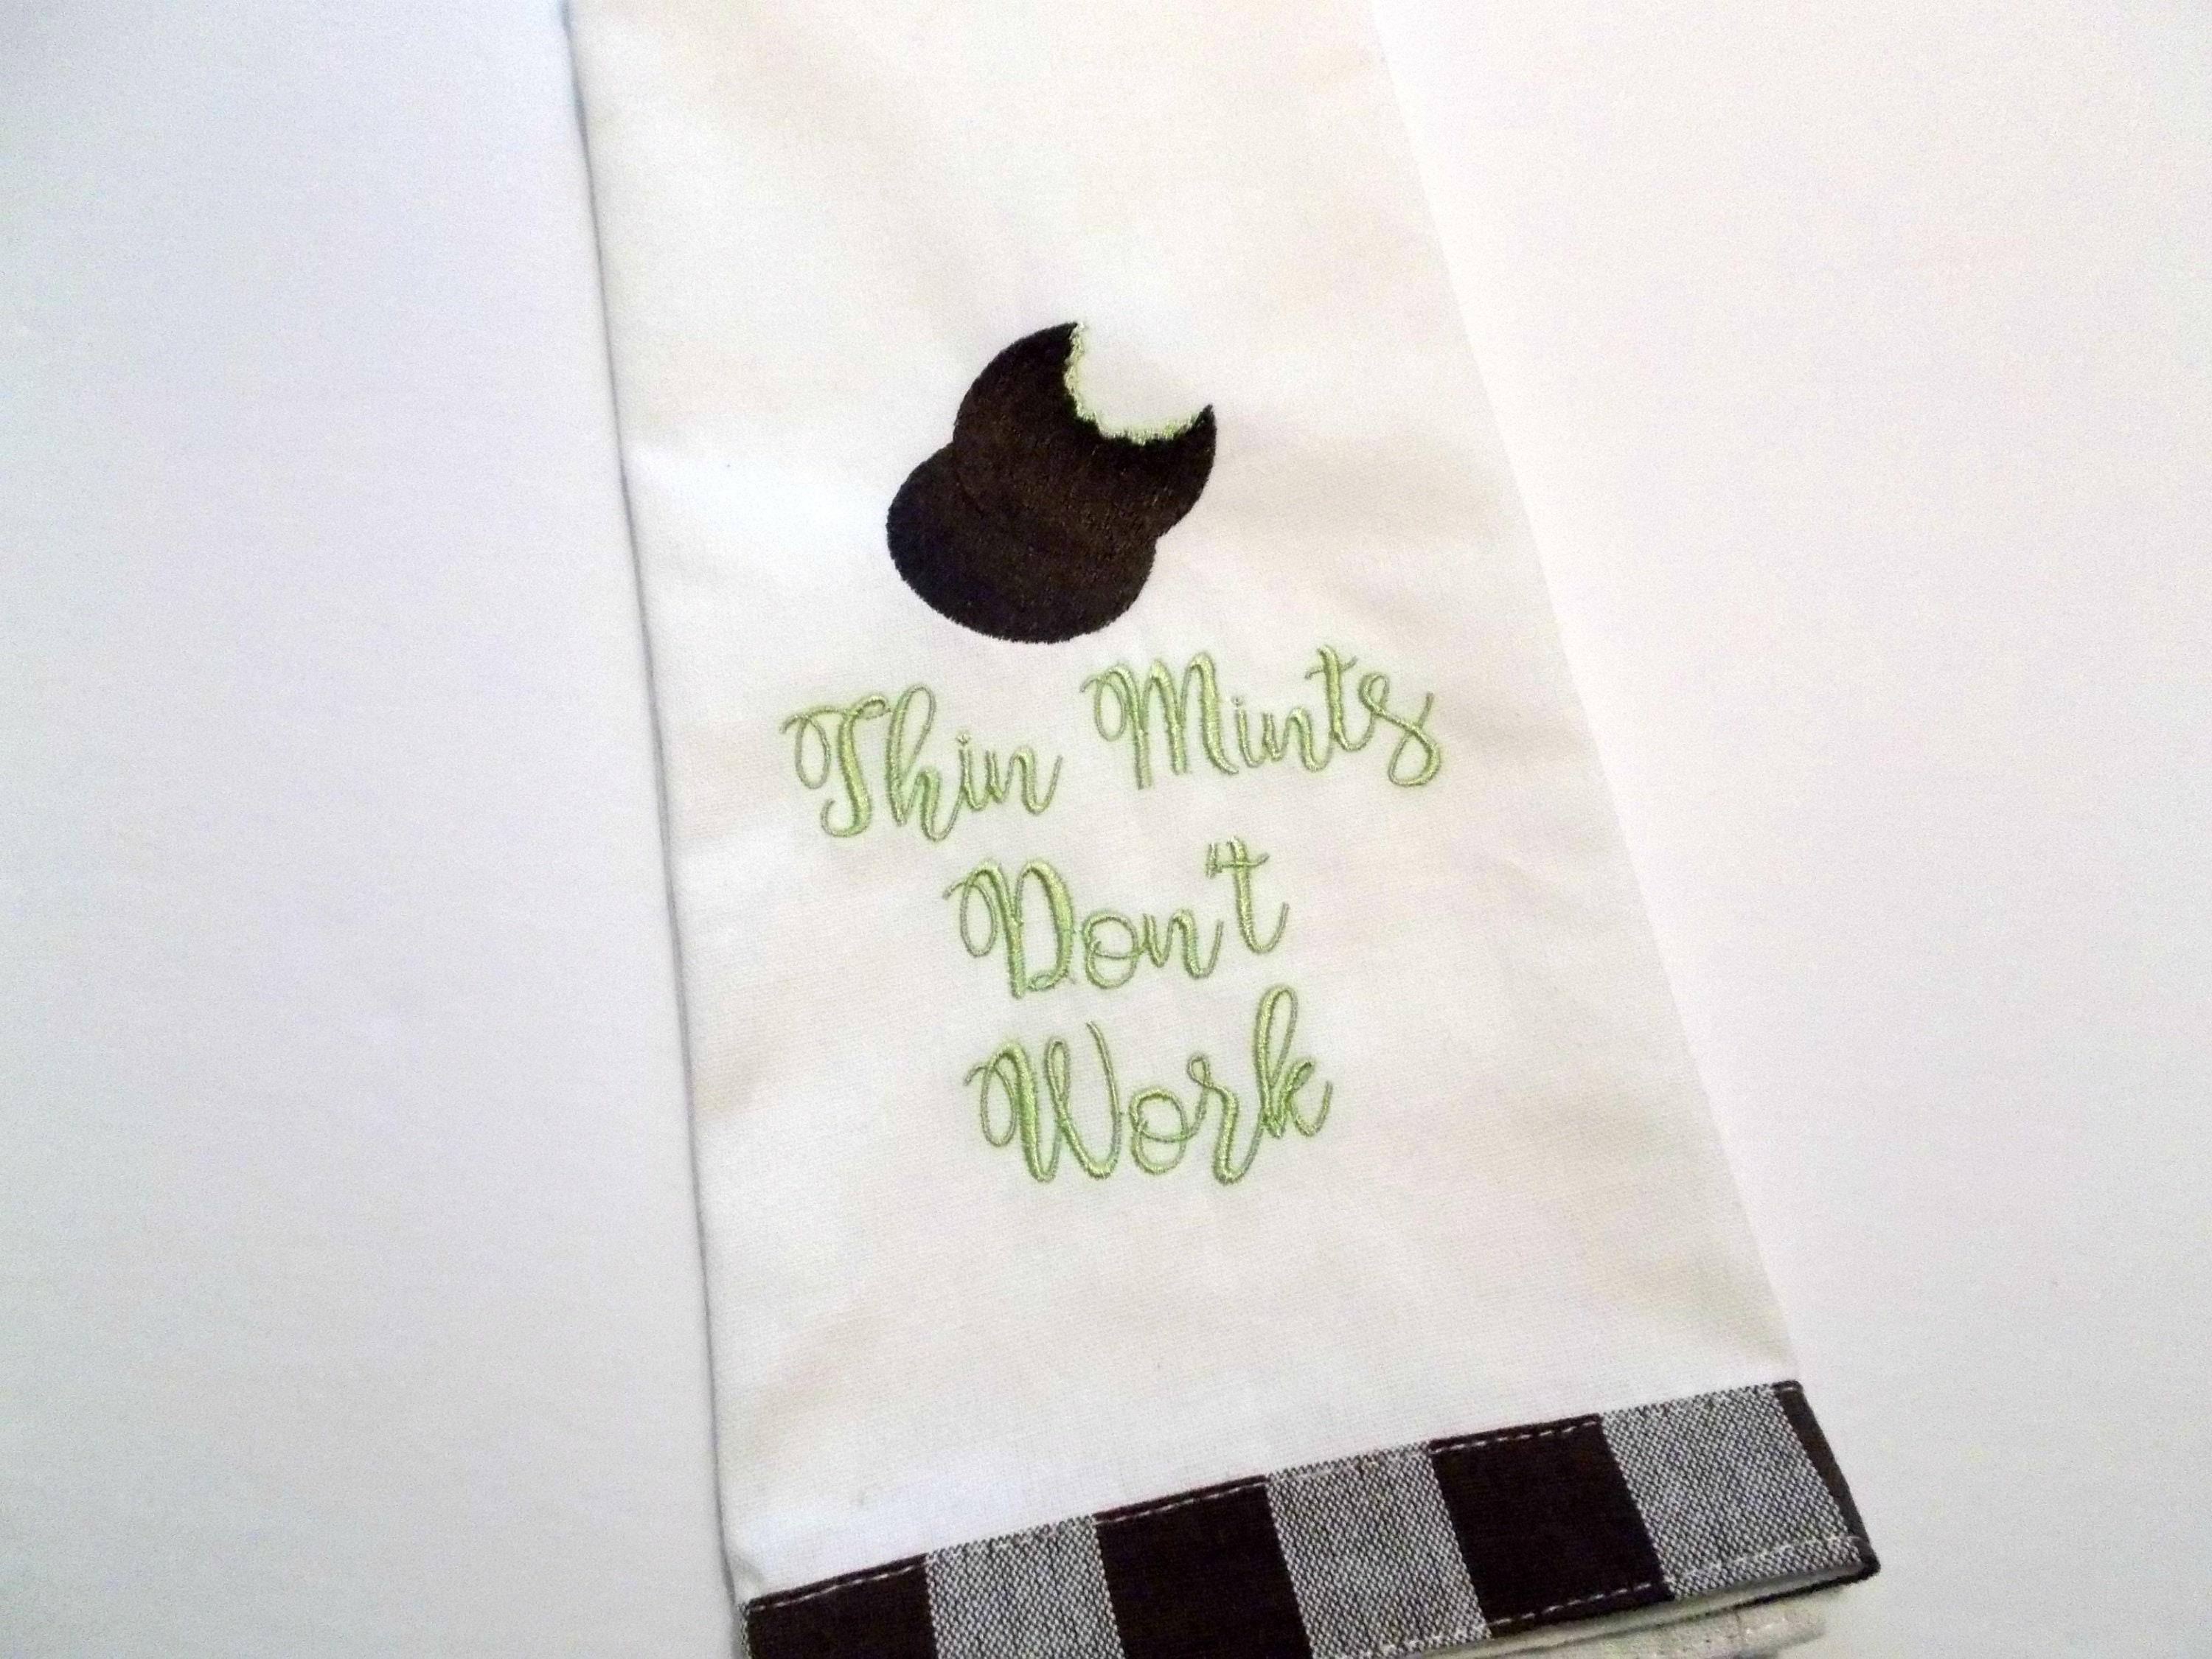  Decorative Kitchen Towels - Funny Kitchen Towels with